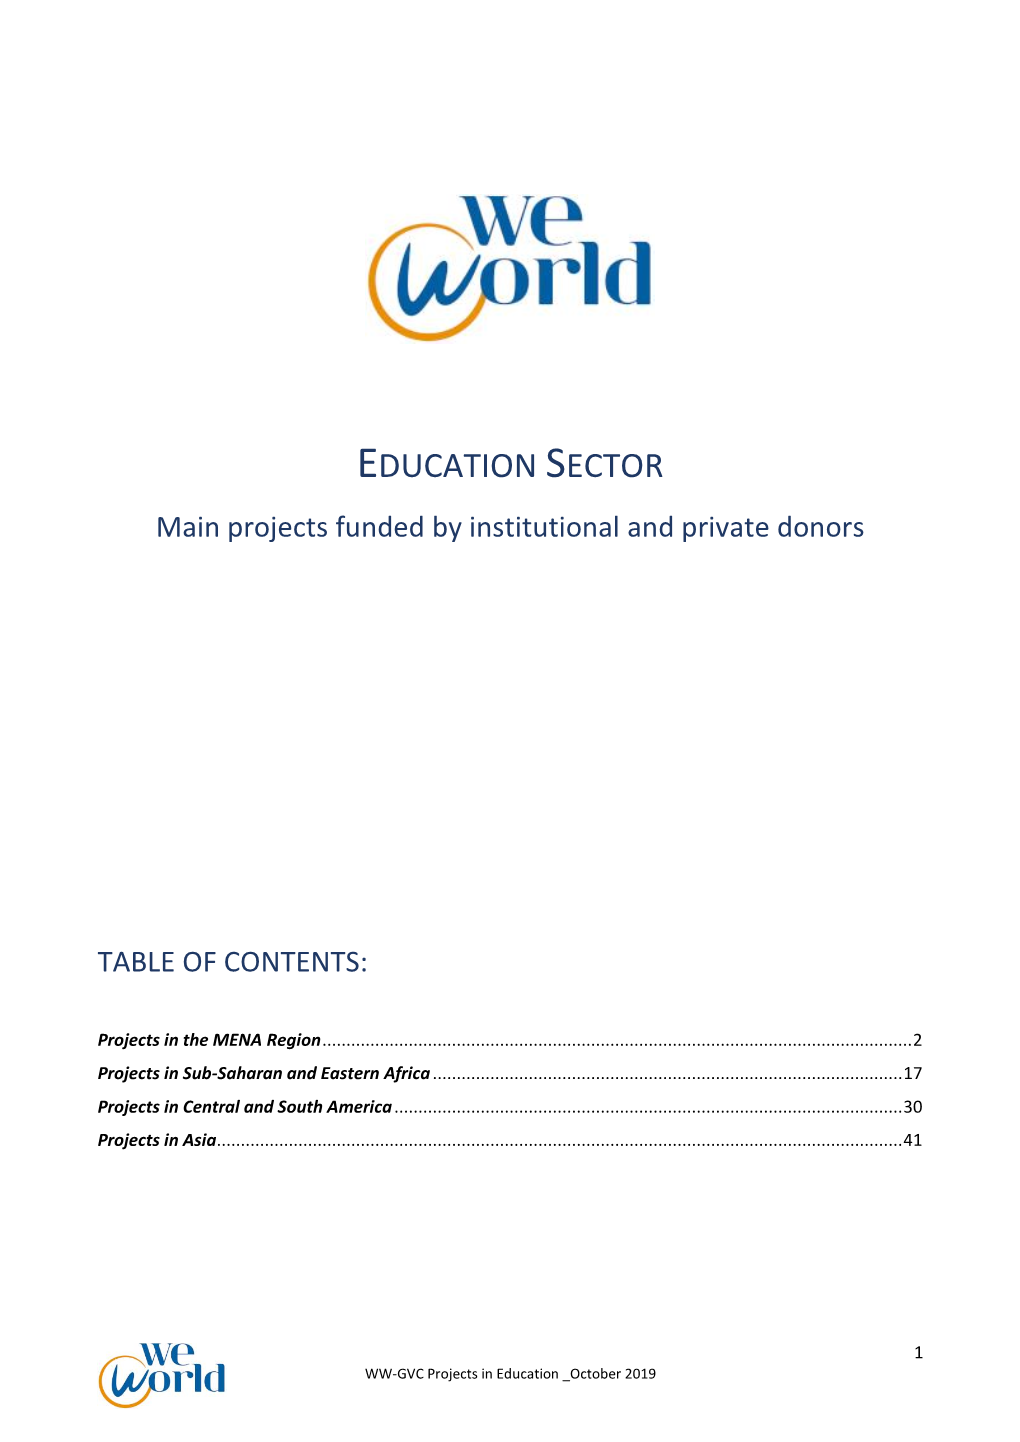 EDUCATION SECTOR Main Projects Funded by Institutional and Private Donors